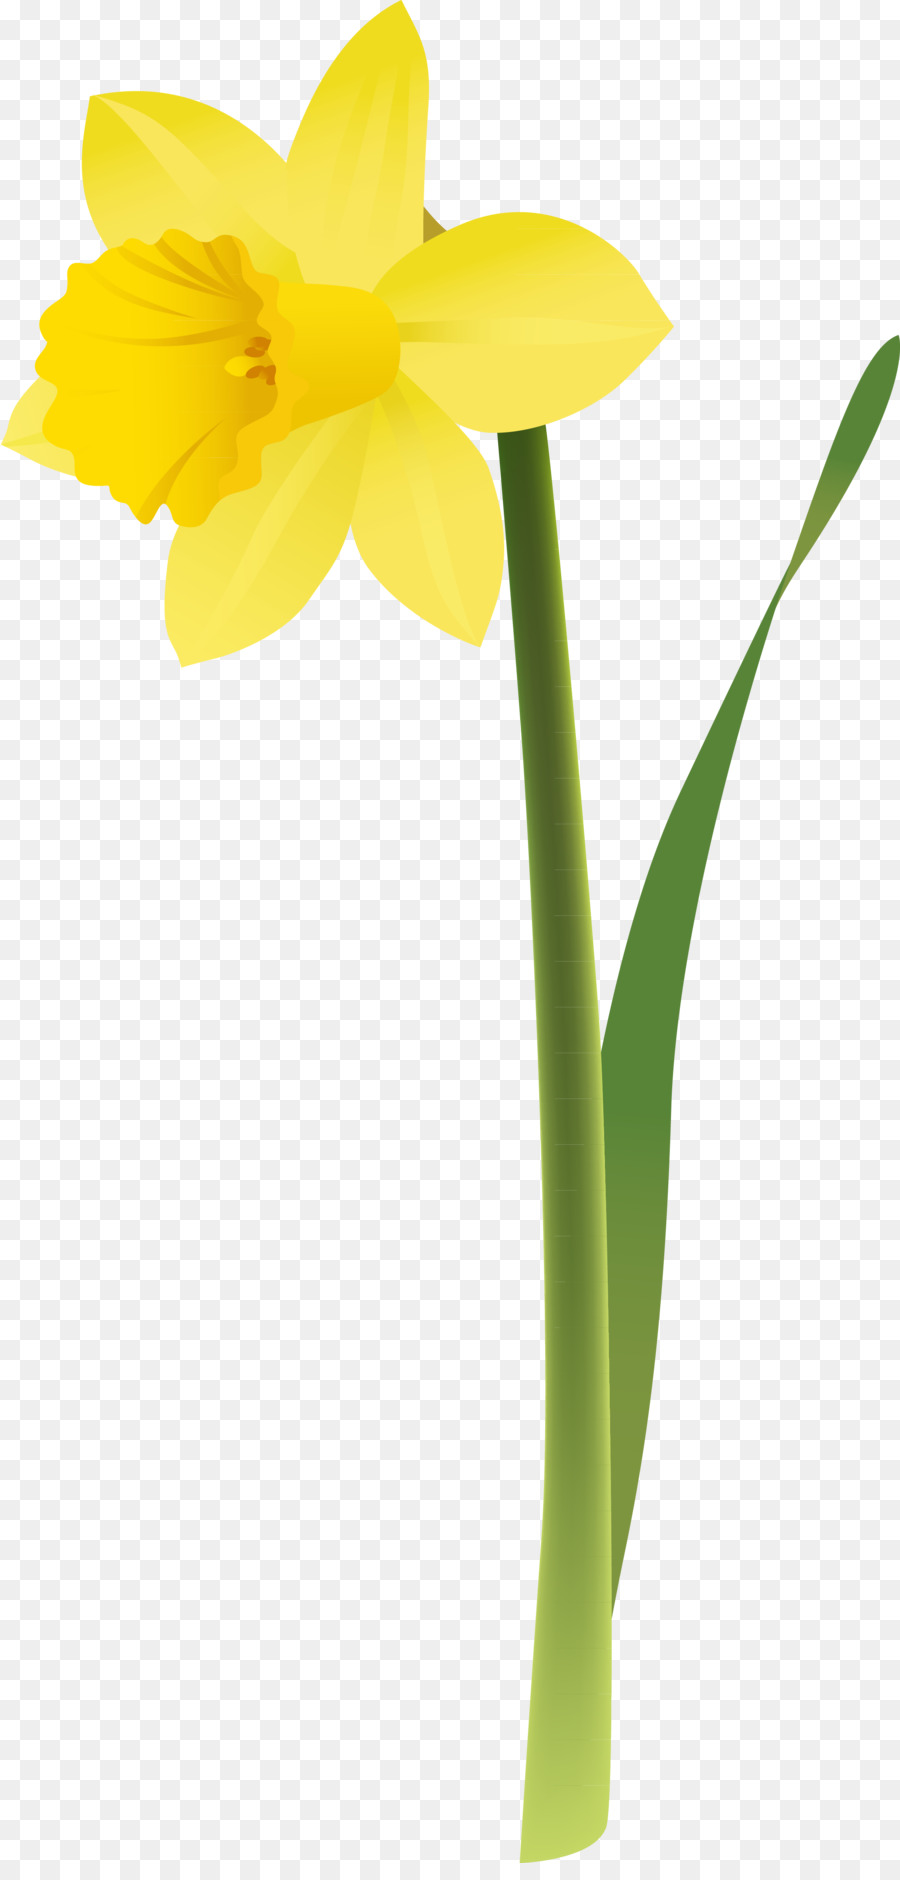 Daffodil Flower Clip art - Narcissus png download - 2260*4679 - Free Transparent Daffodil png Download.